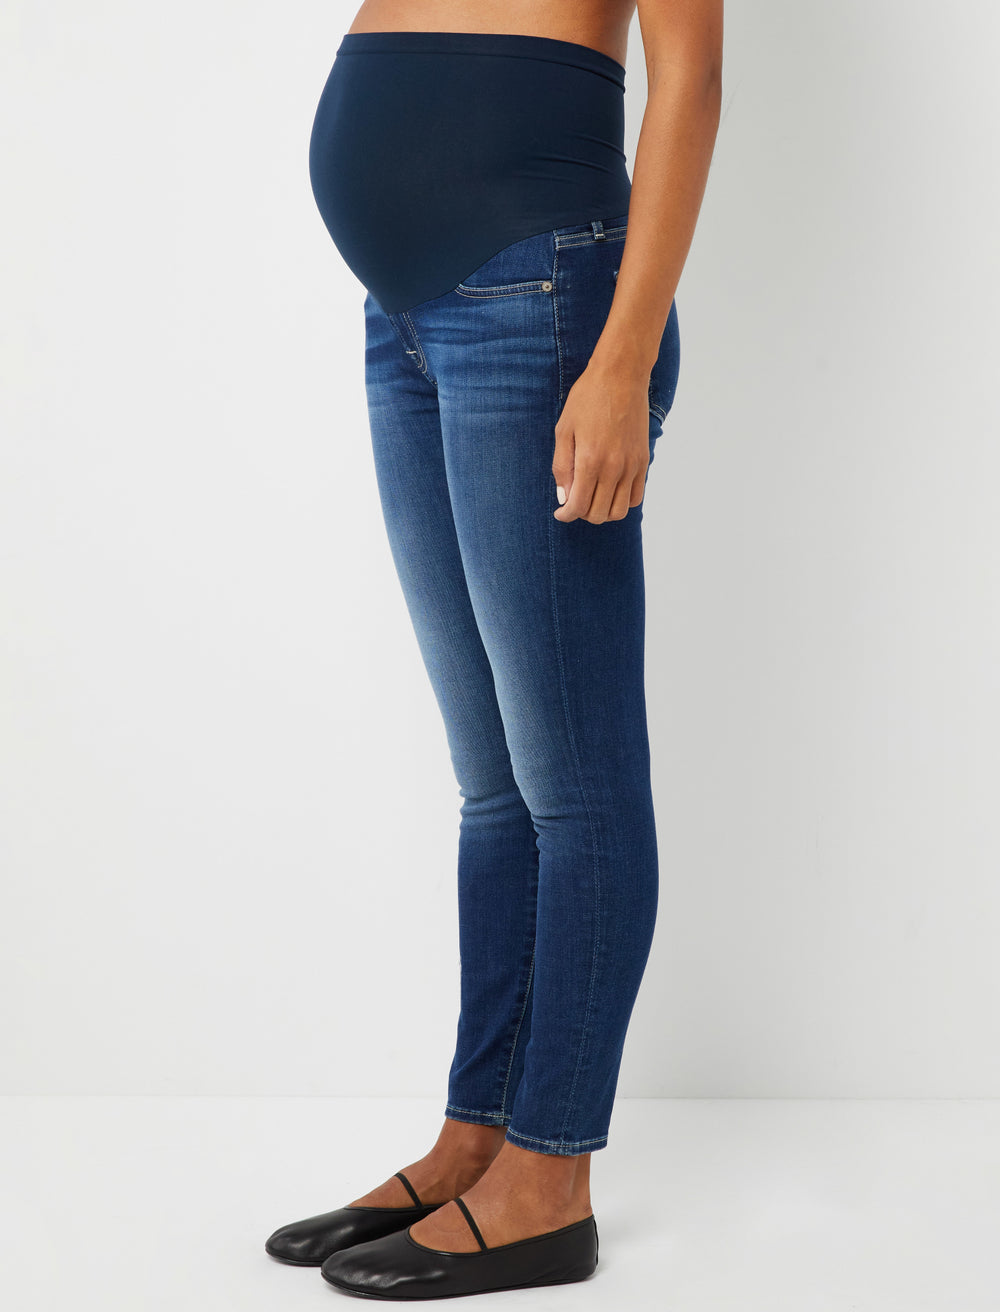 Sinis voor Broer 7 For All Mankind Secret Fit Belly B(air) Ankle Skinny Maternity Jeans - A  Pea In the Pod